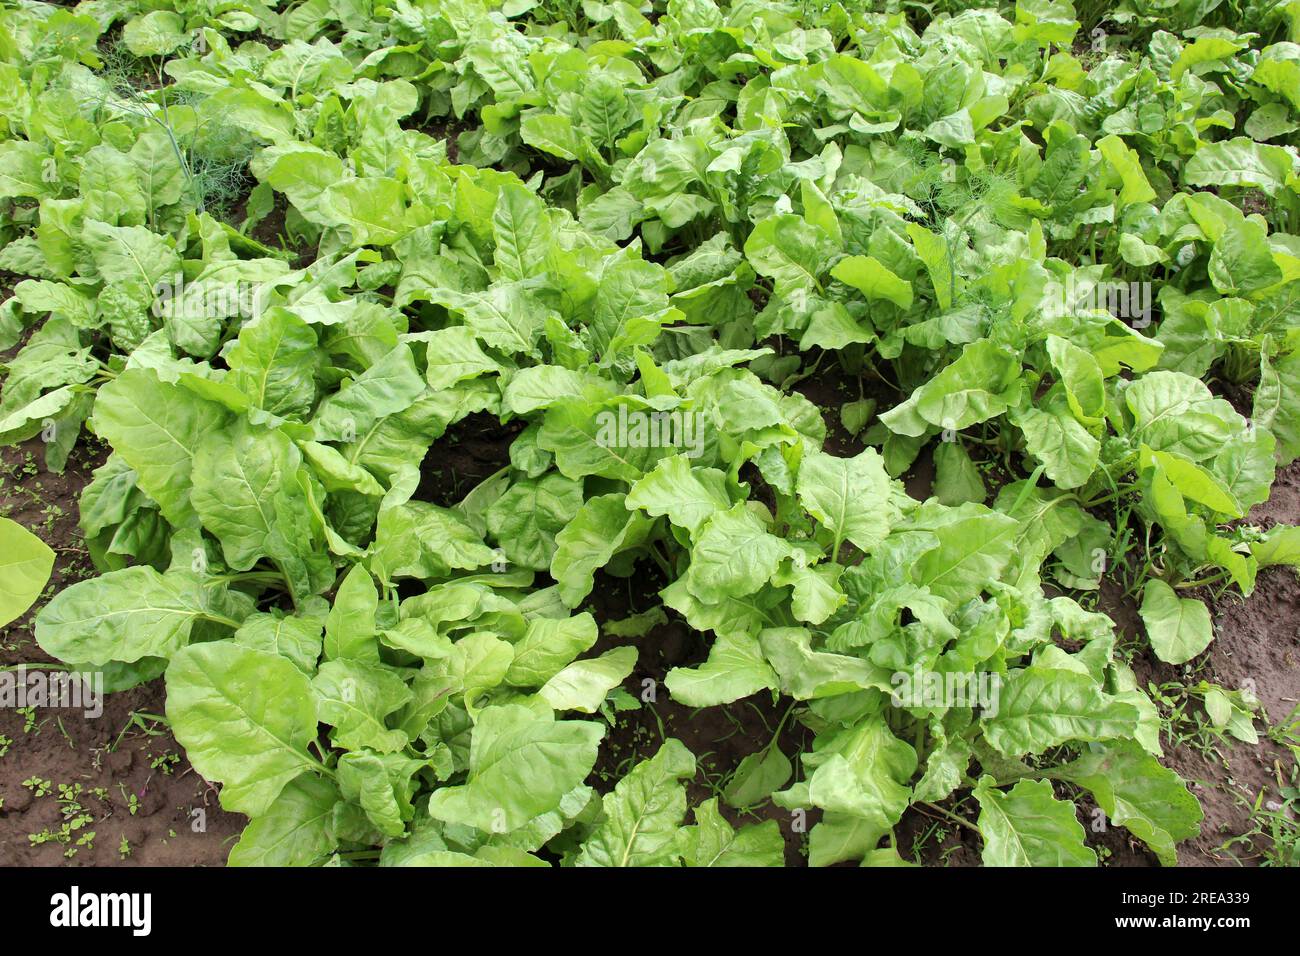 A young fodder beet (Beta vulgaris) grows on a farm field, intended for animal fattening Stock Photo